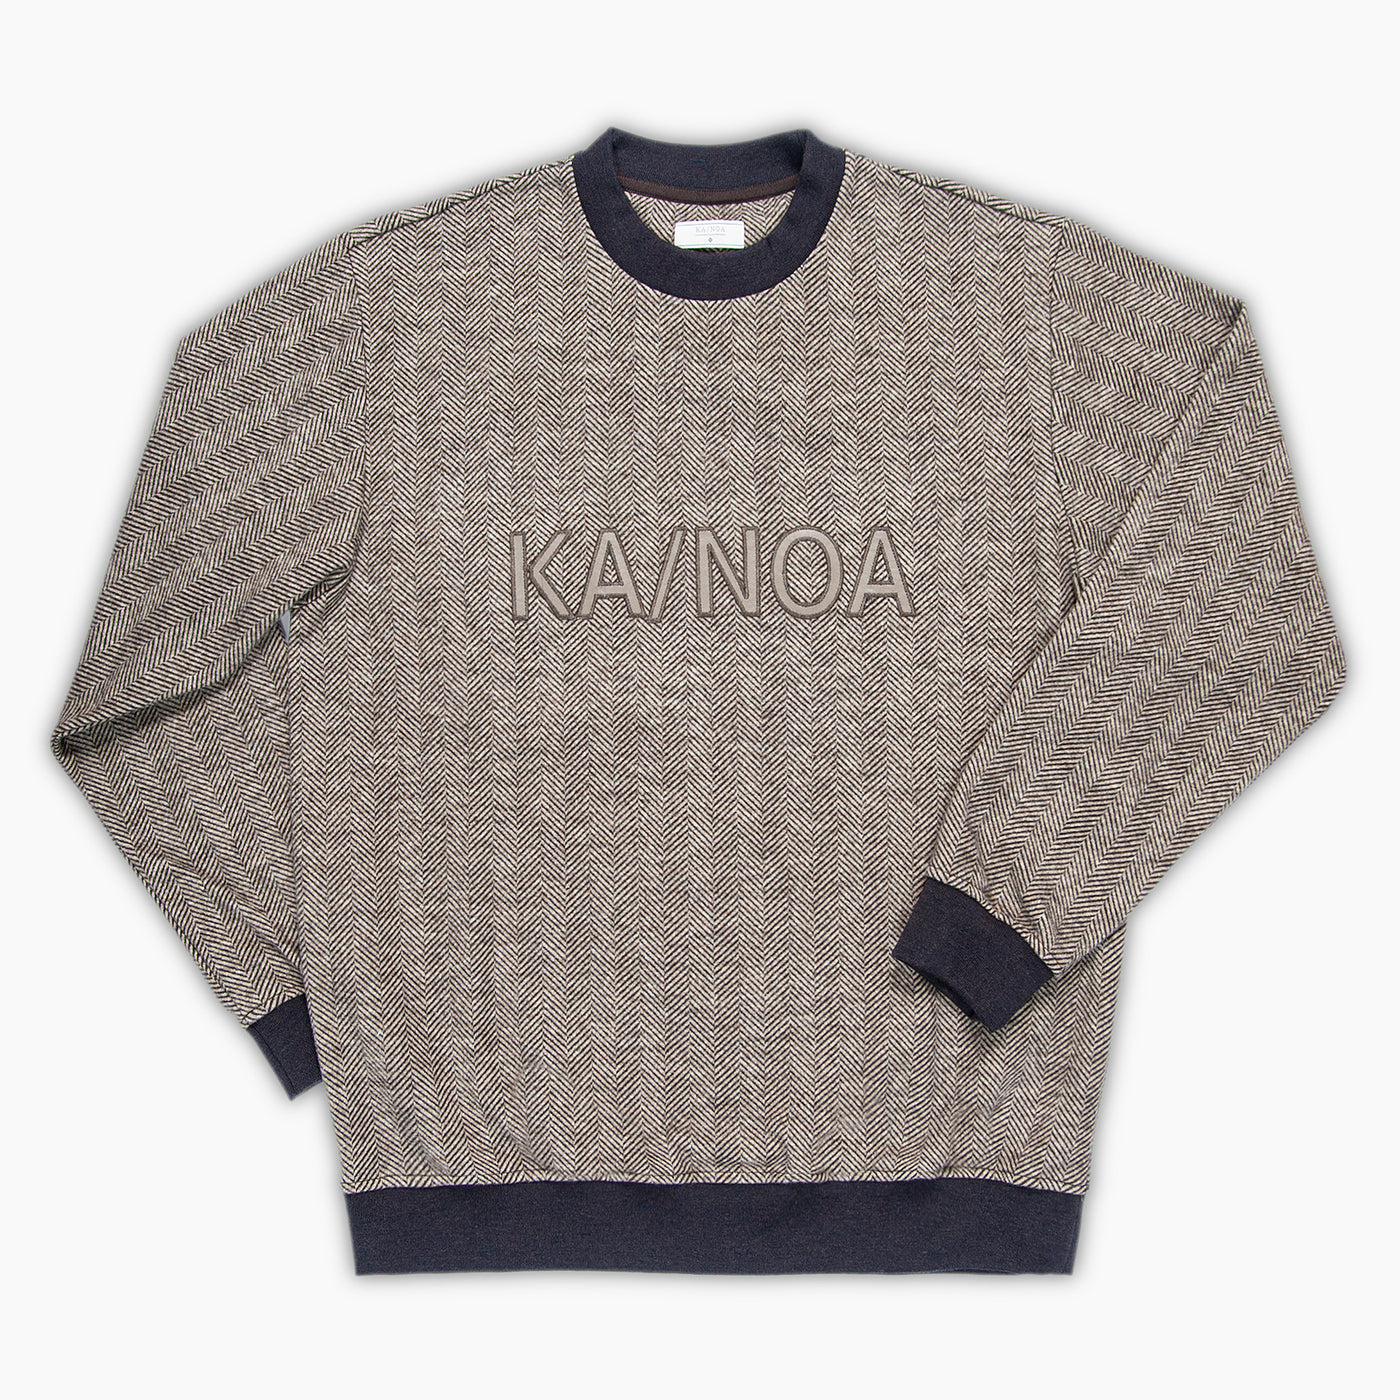 Sean yarn dyed wool and cotton crew neck sweater with logo in leather